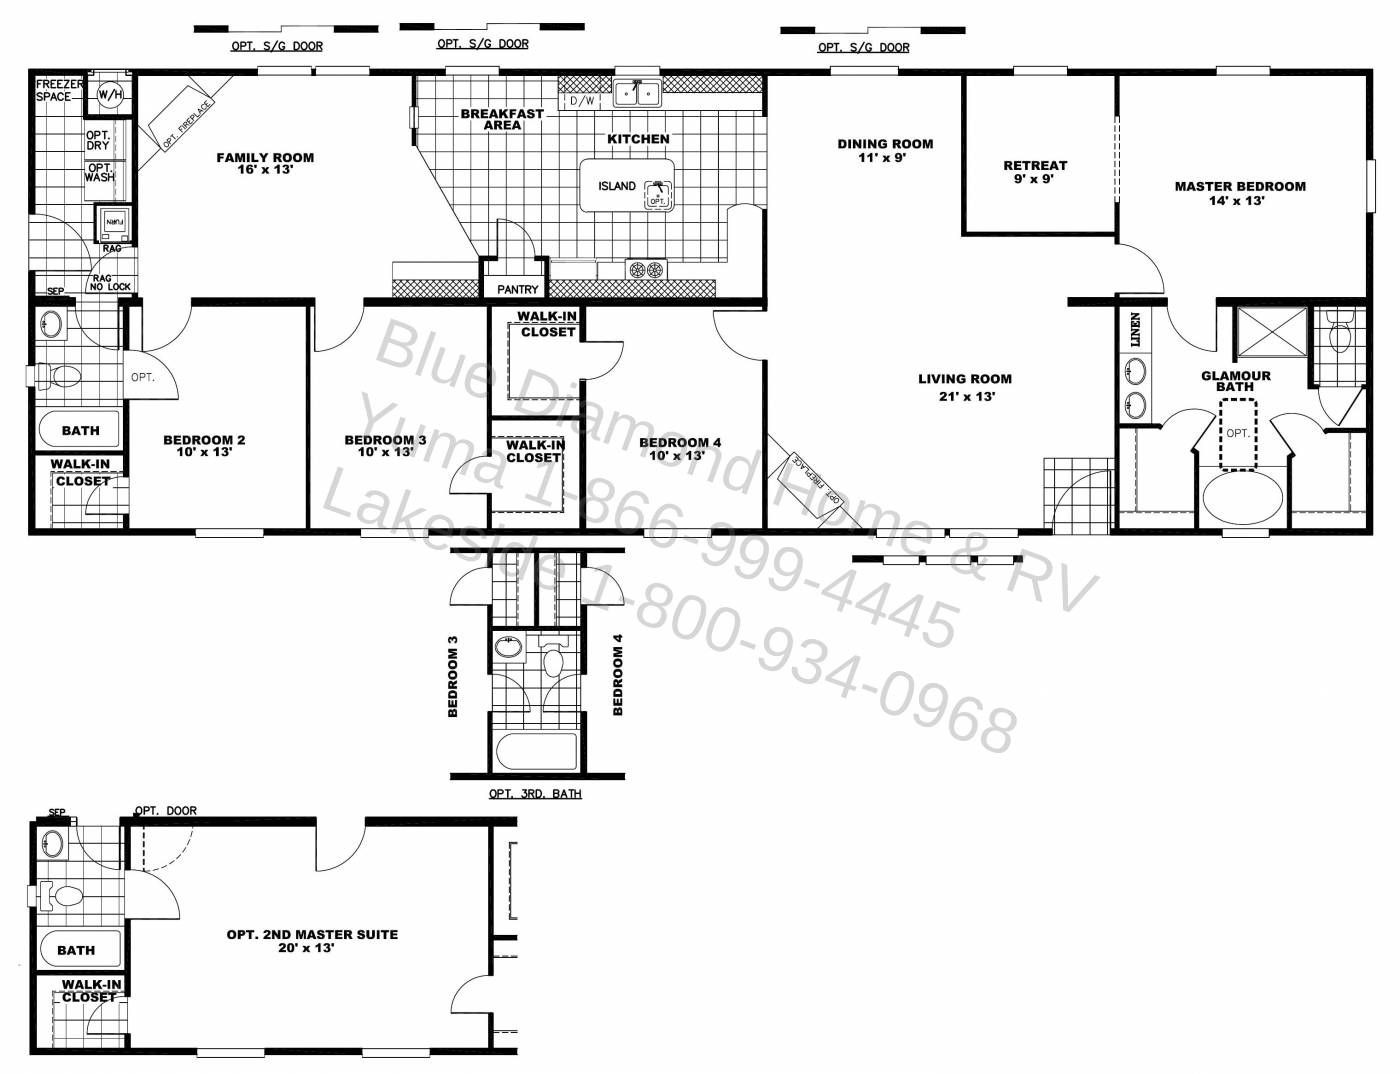 Two Master Bedroom Floor Plans
 Clayton SED 2876 4A in 2019